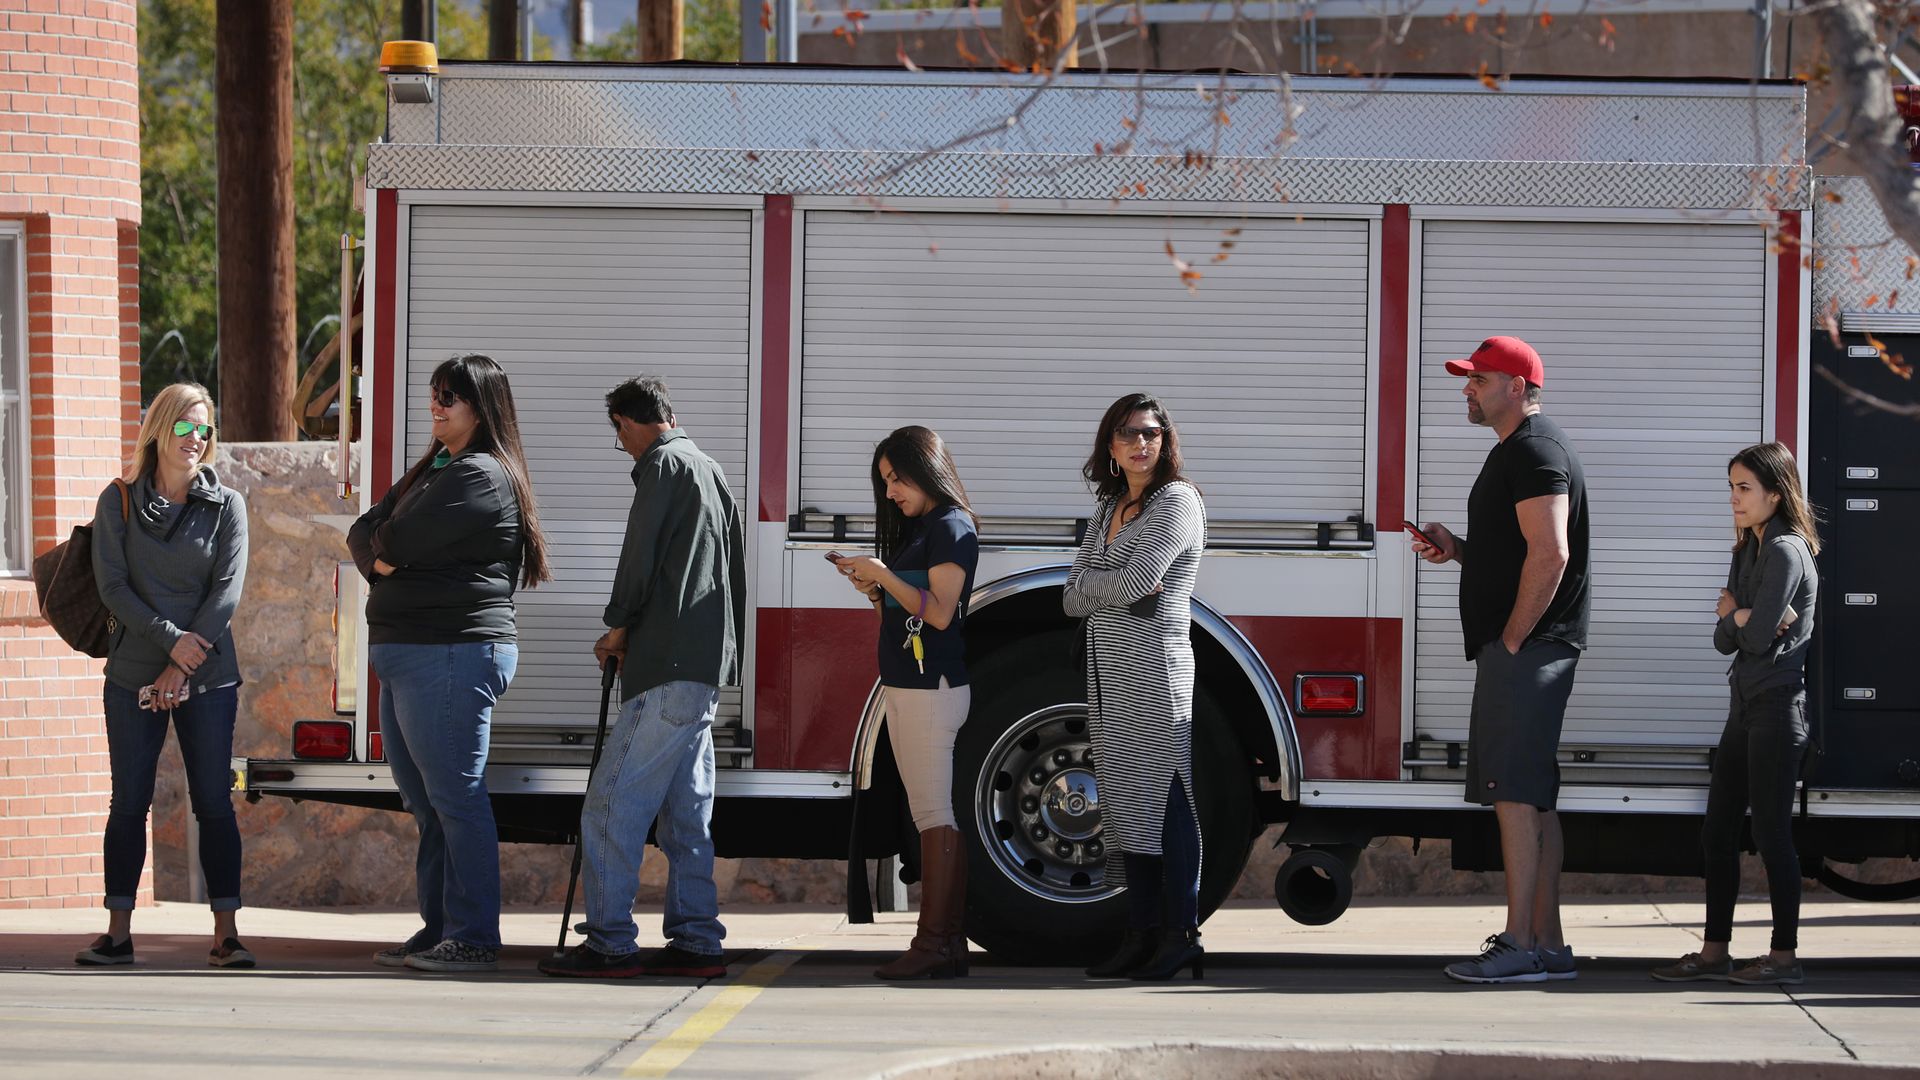 Voters are seen lined up next to a fire truck as they wait to cast ballots in a 2018 election.